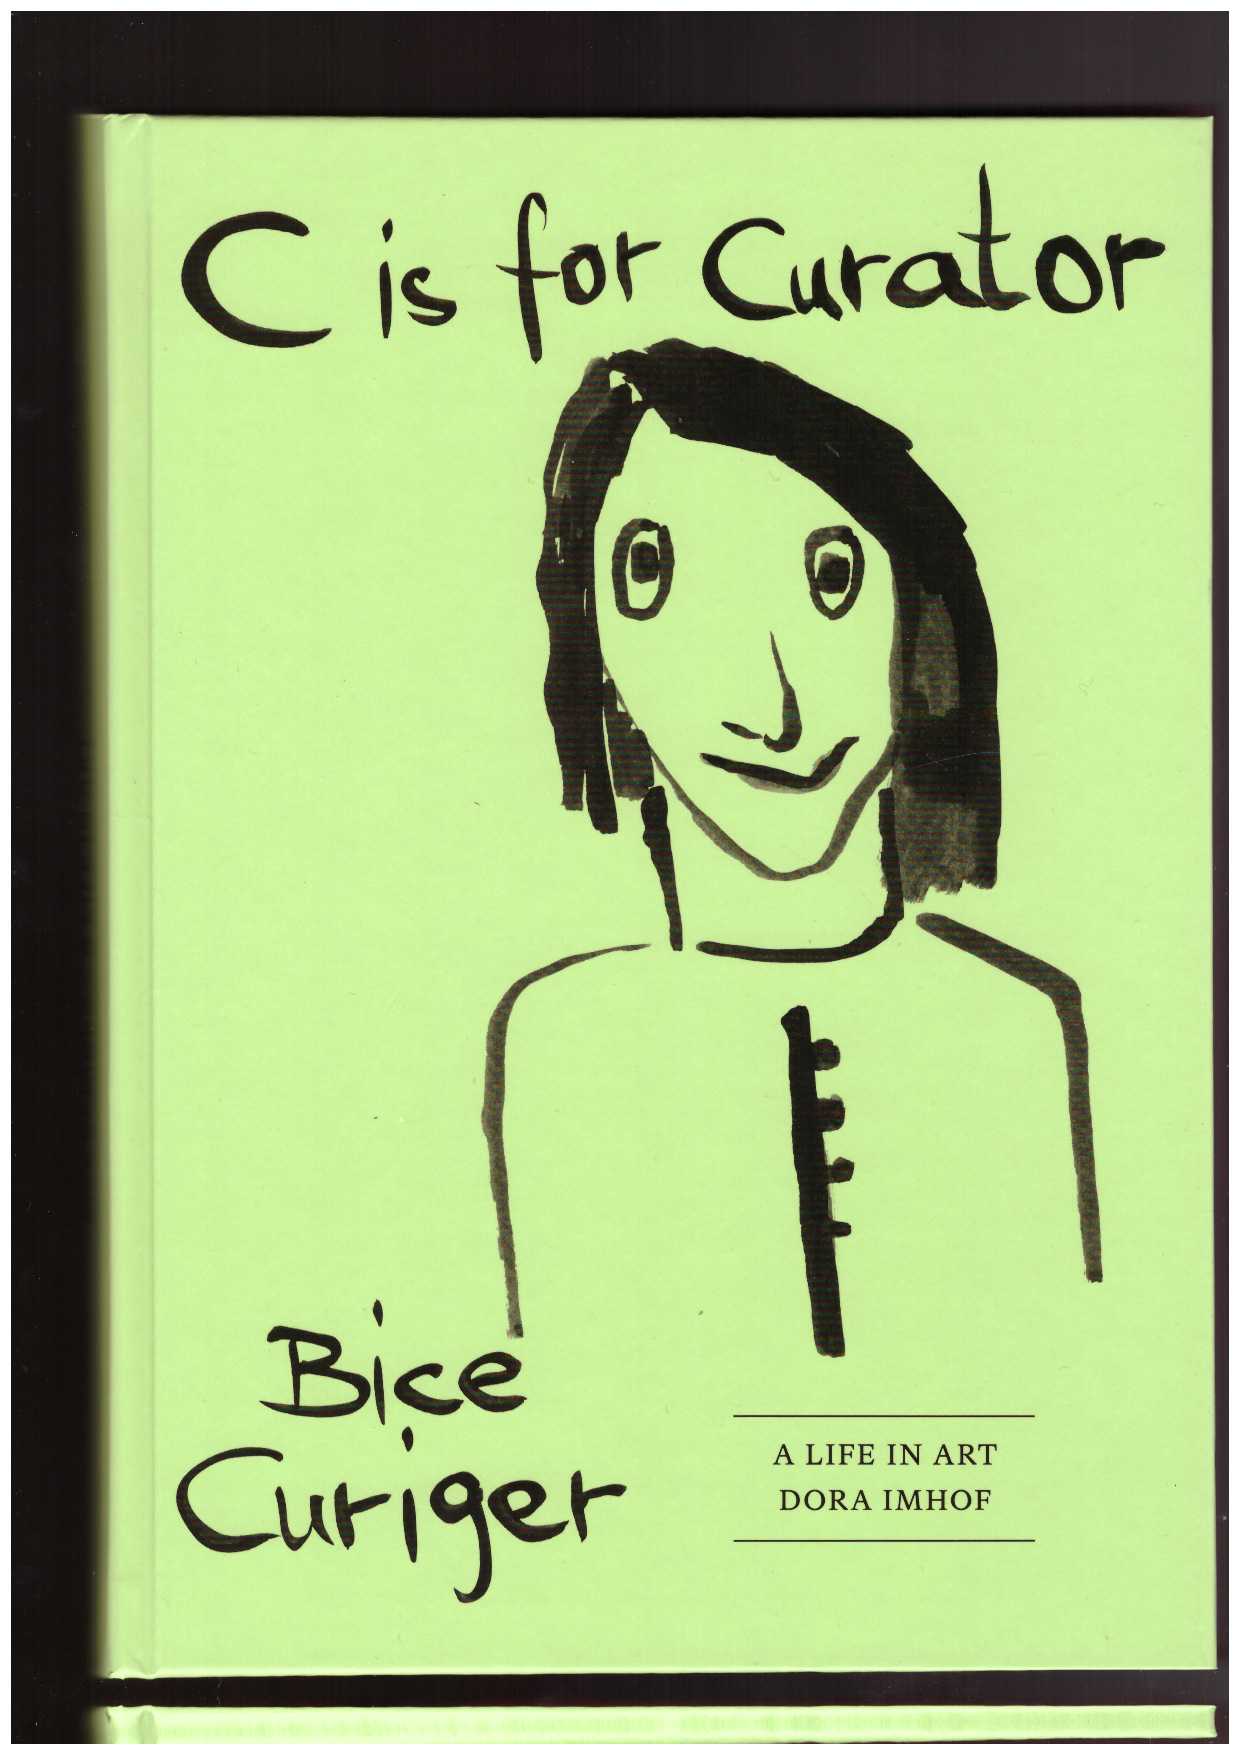 IMHOF, Dora - C is for Curator: Bice Curiger – A Life in Art